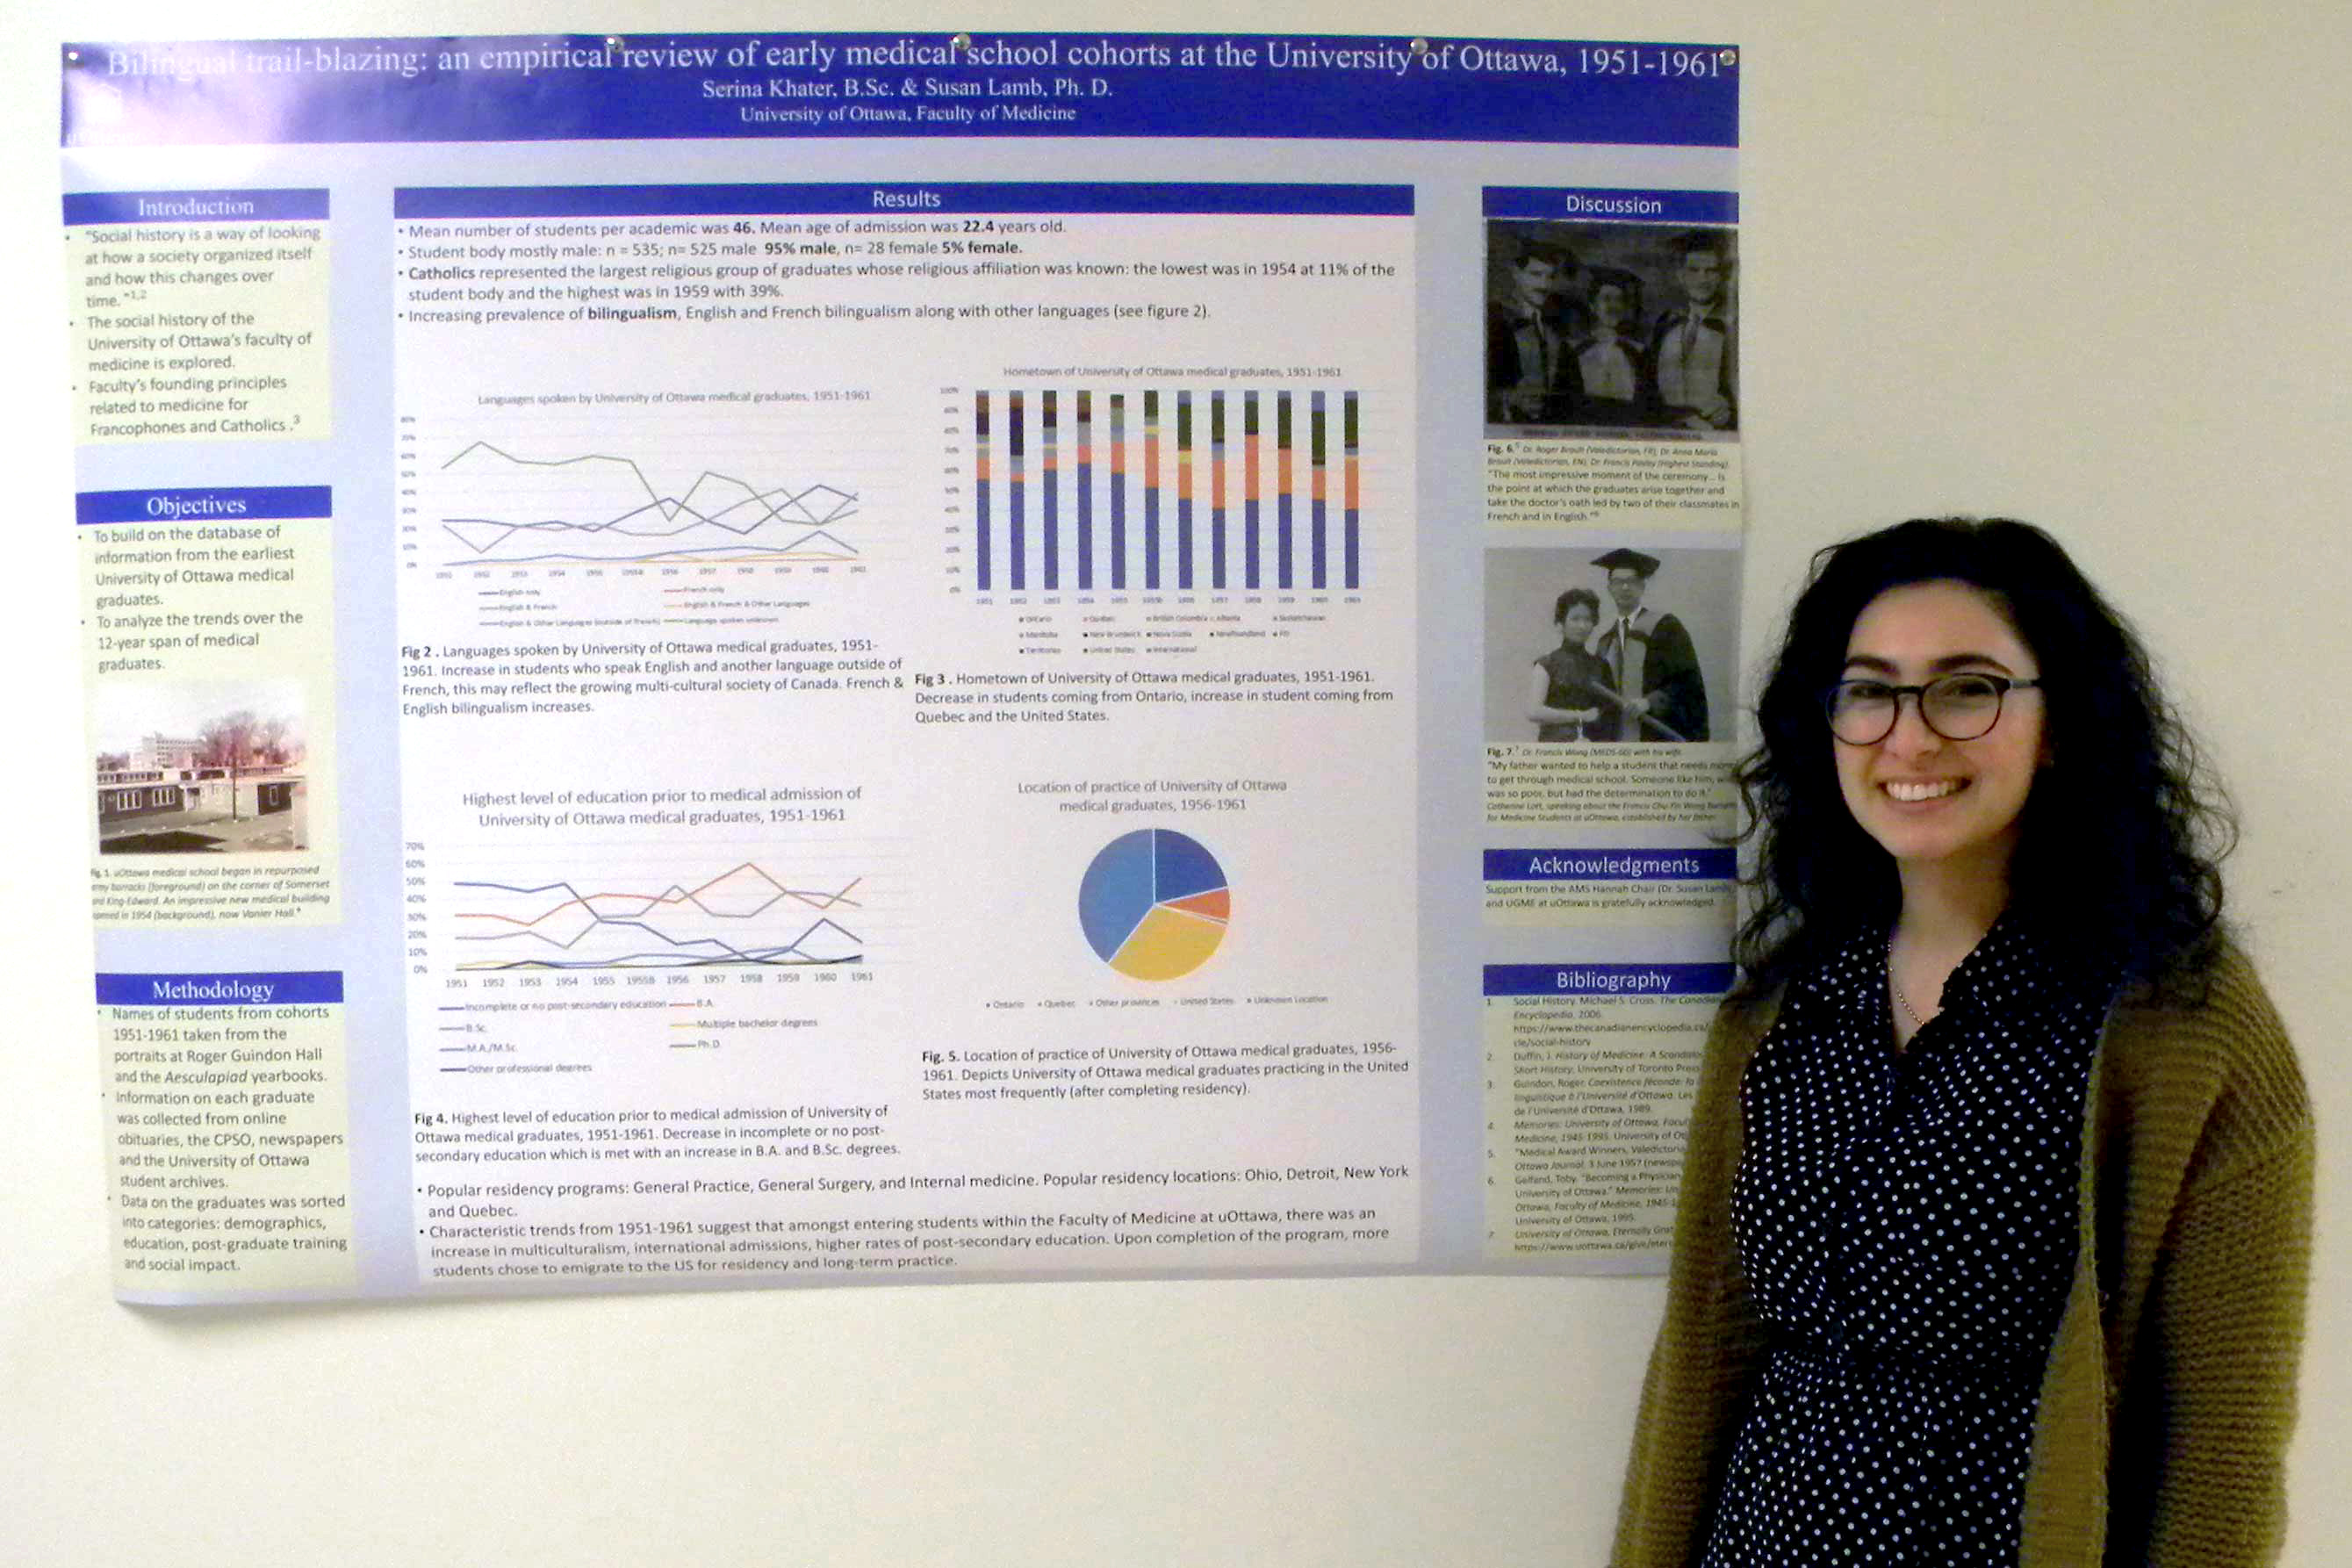 Photo of Serina Khater standing in front of her poster.